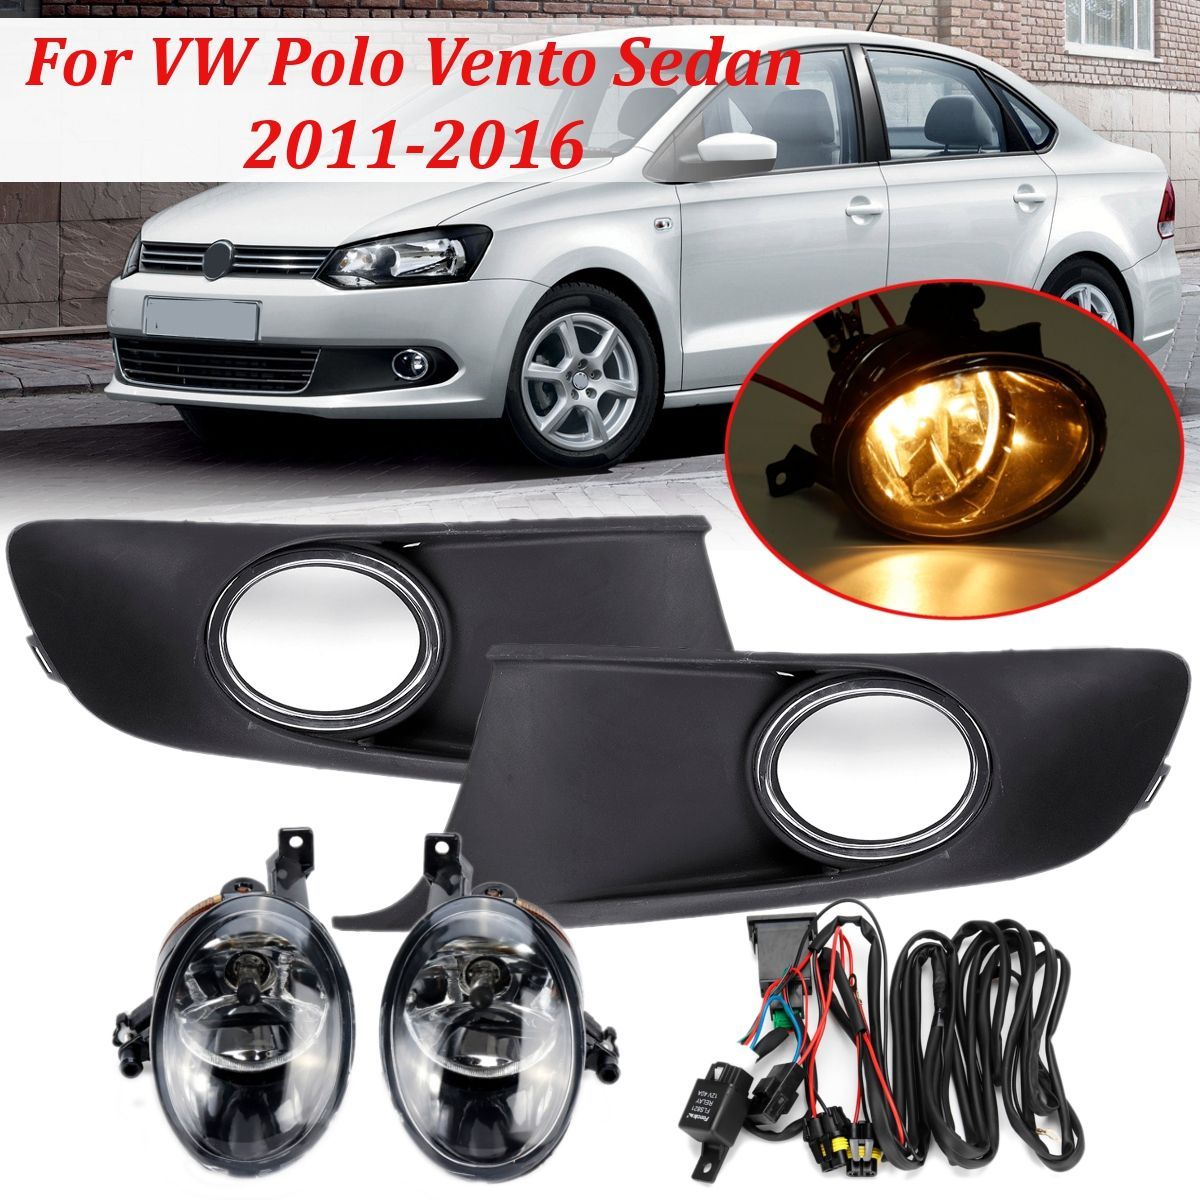 2Pcs-Car-Front-Bumper-Fog-Lights-Lamps-Grilles-Wiring-Harness-With-Relay-Switch-For-VW-Polo-Vento-Se-1680511